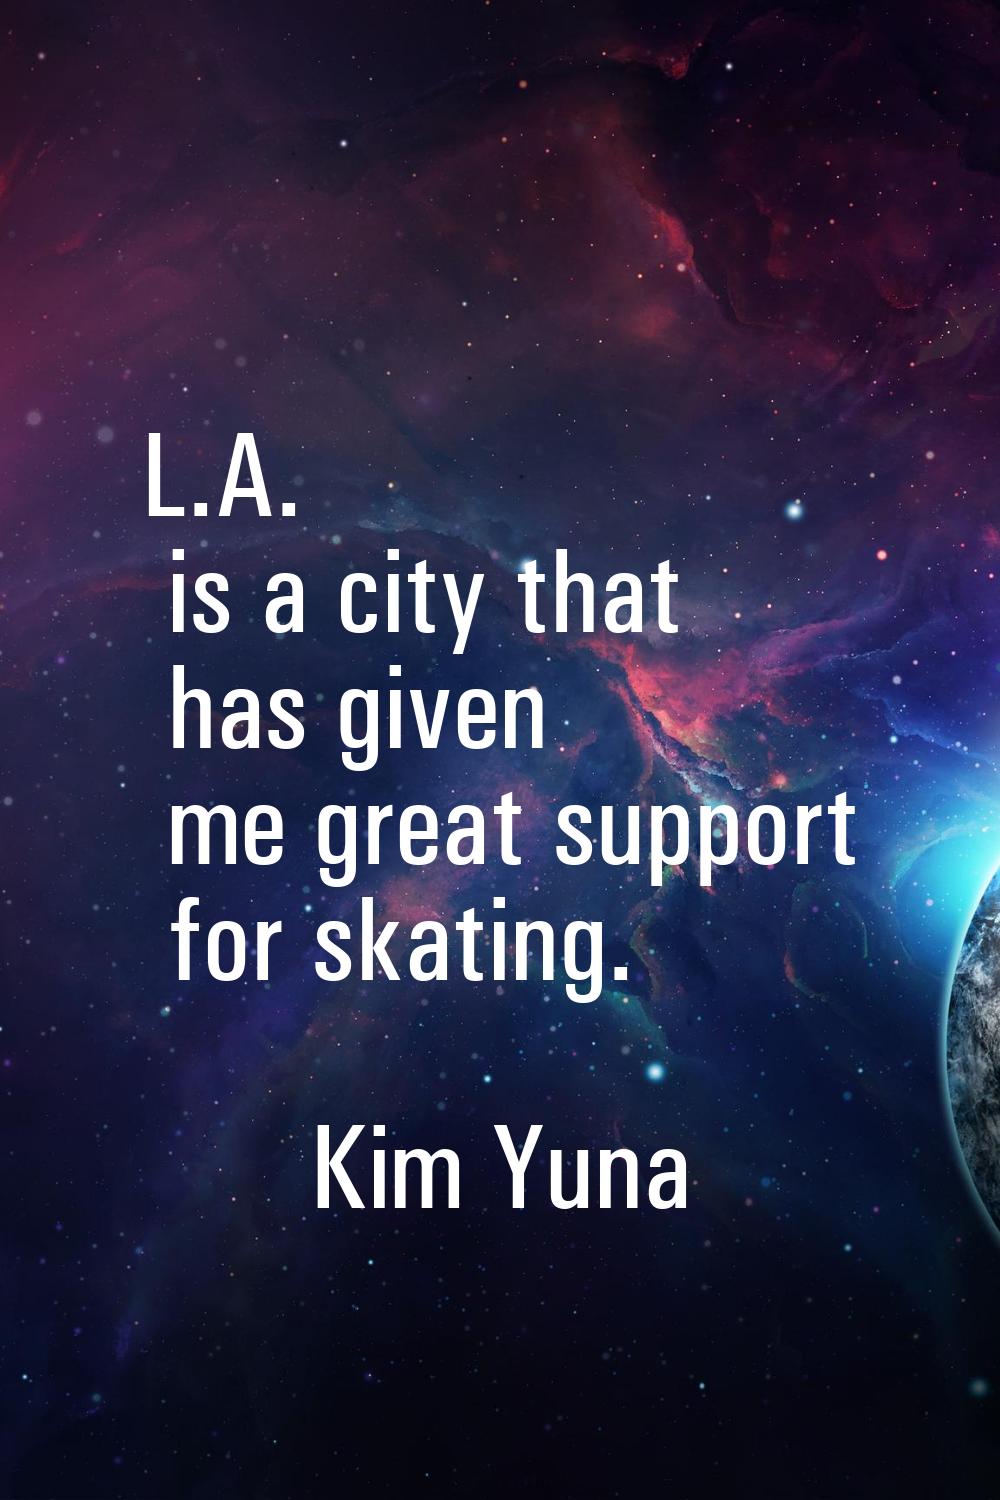 L.A. is a city that has given me great support for skating.